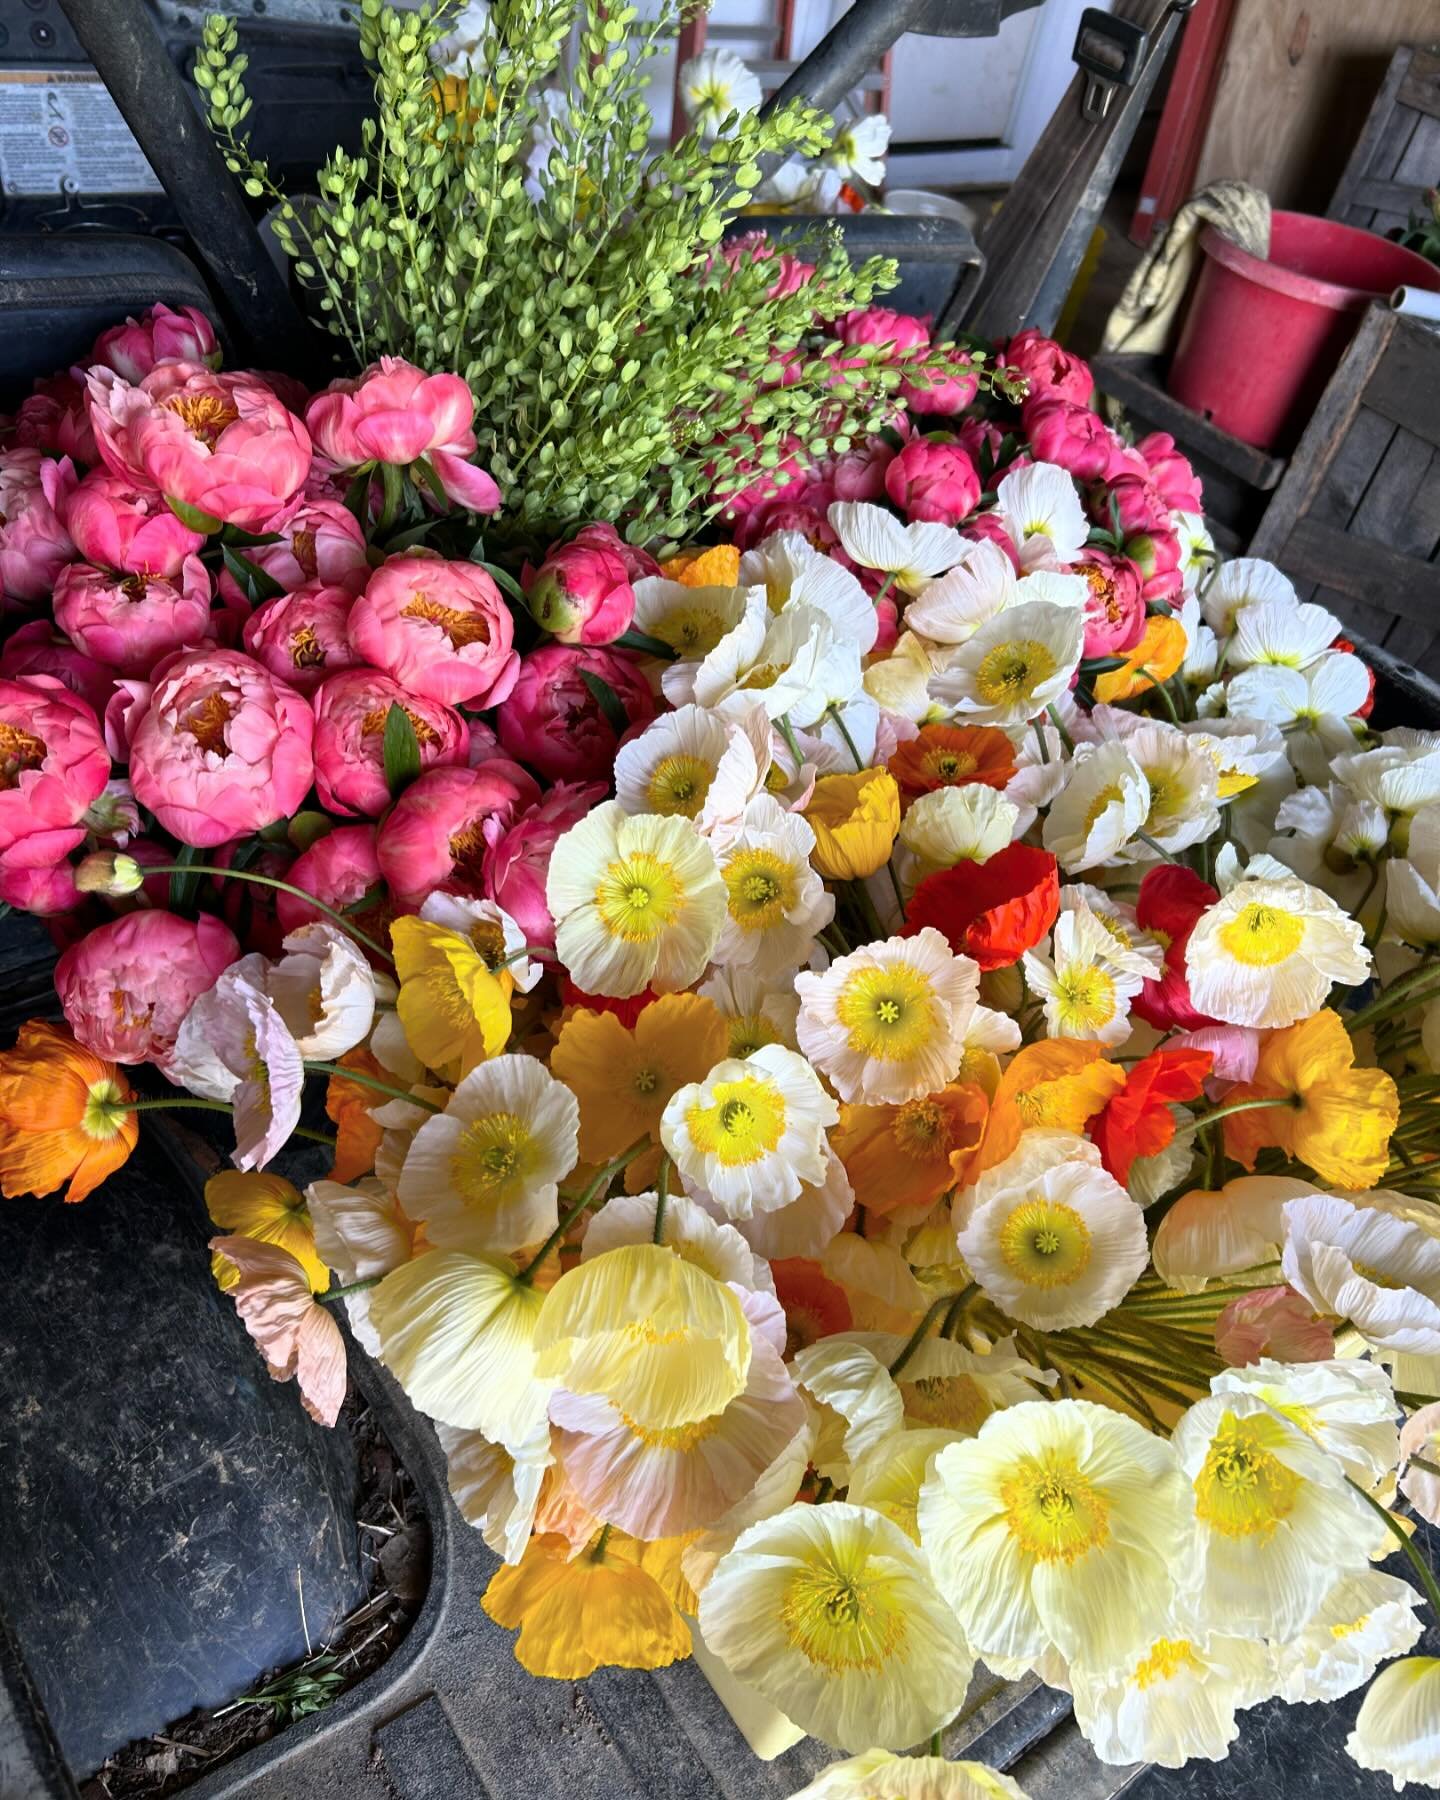 (Puts neoprene ankle boots on with no socks) 
&ldquo;I&rsquo;ll just go feed the dogs, water the prop house and take stock of what I can put in wholesale this week&rdquo;.
Two hours and some very sweaty feet later I&rsquo;ve cut hundreds of blooms- l